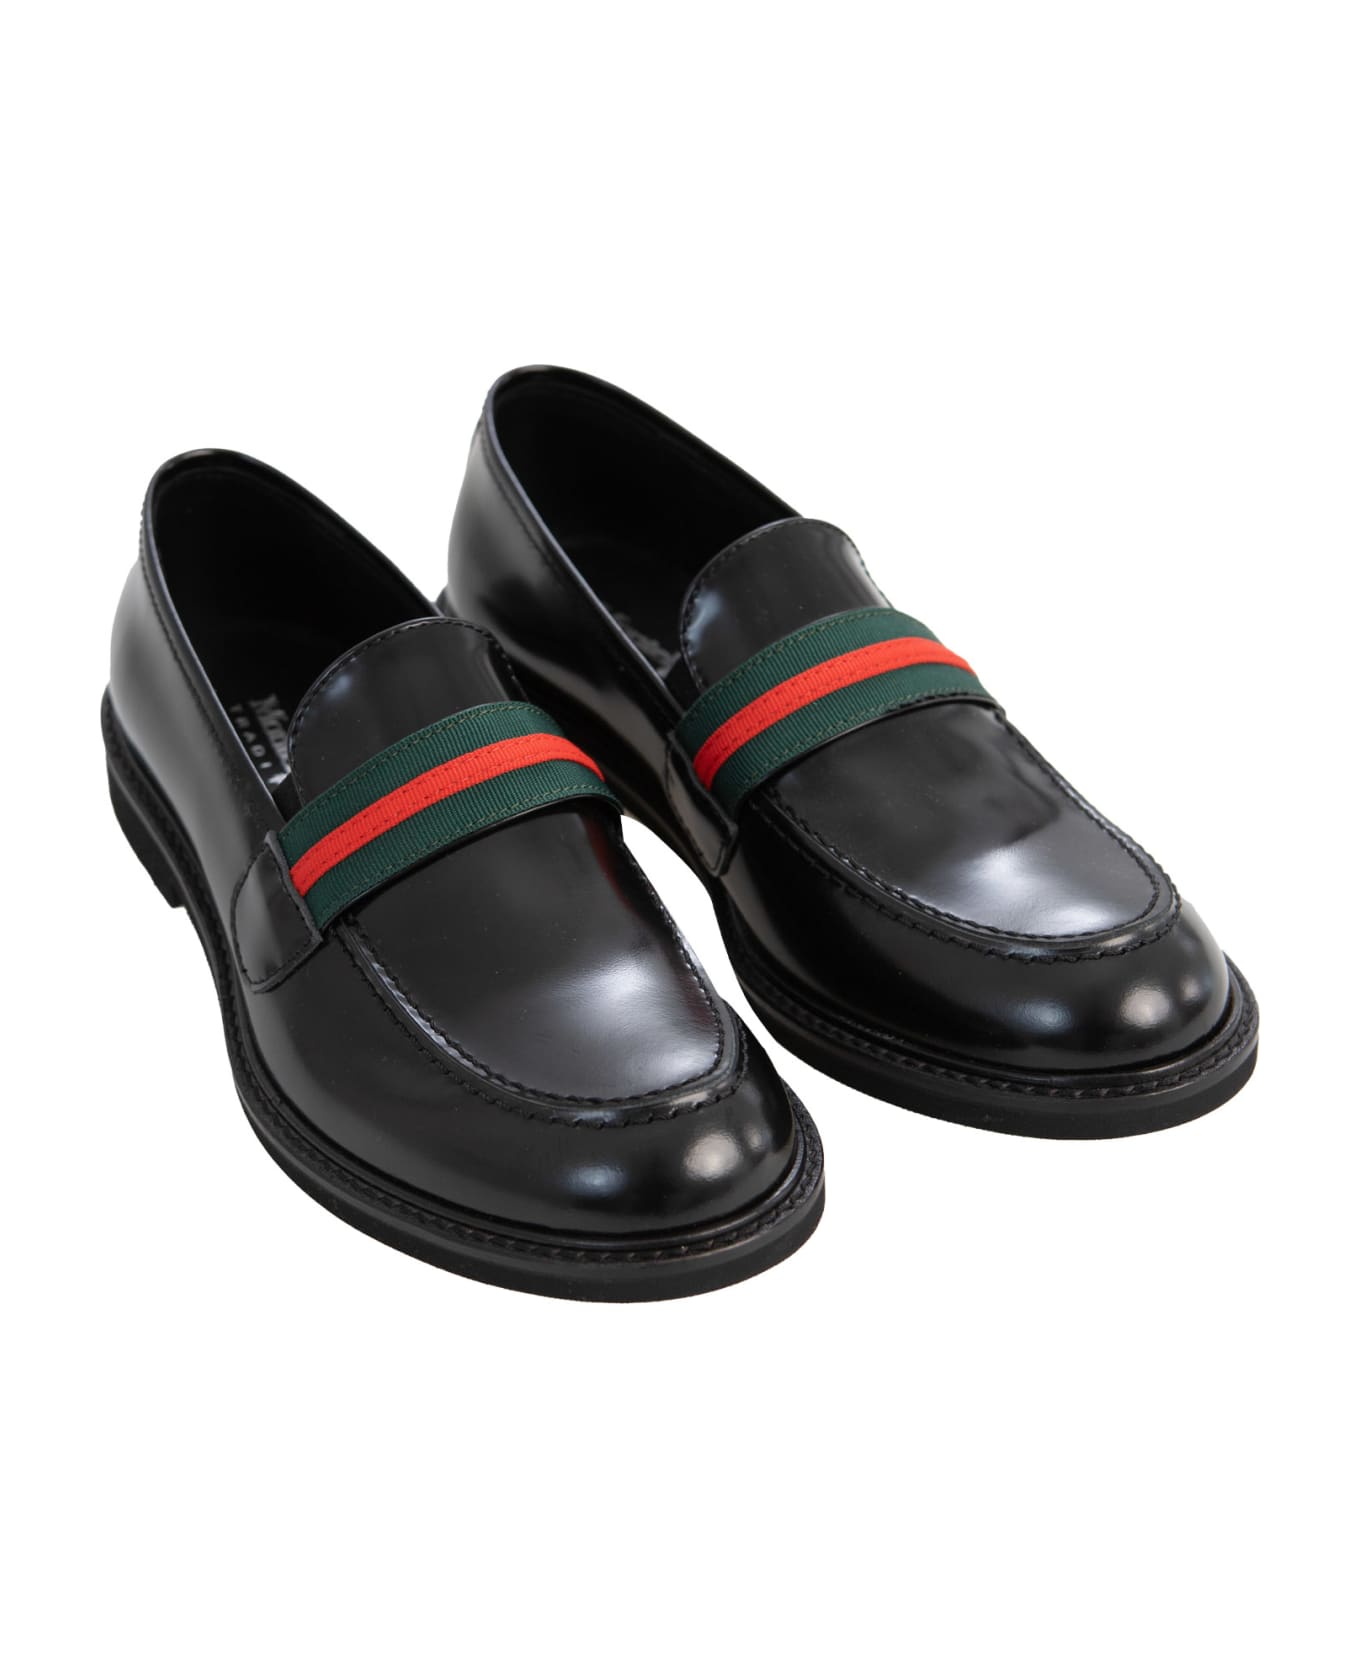 Andrea Montelpare Leather Loafers シューズ